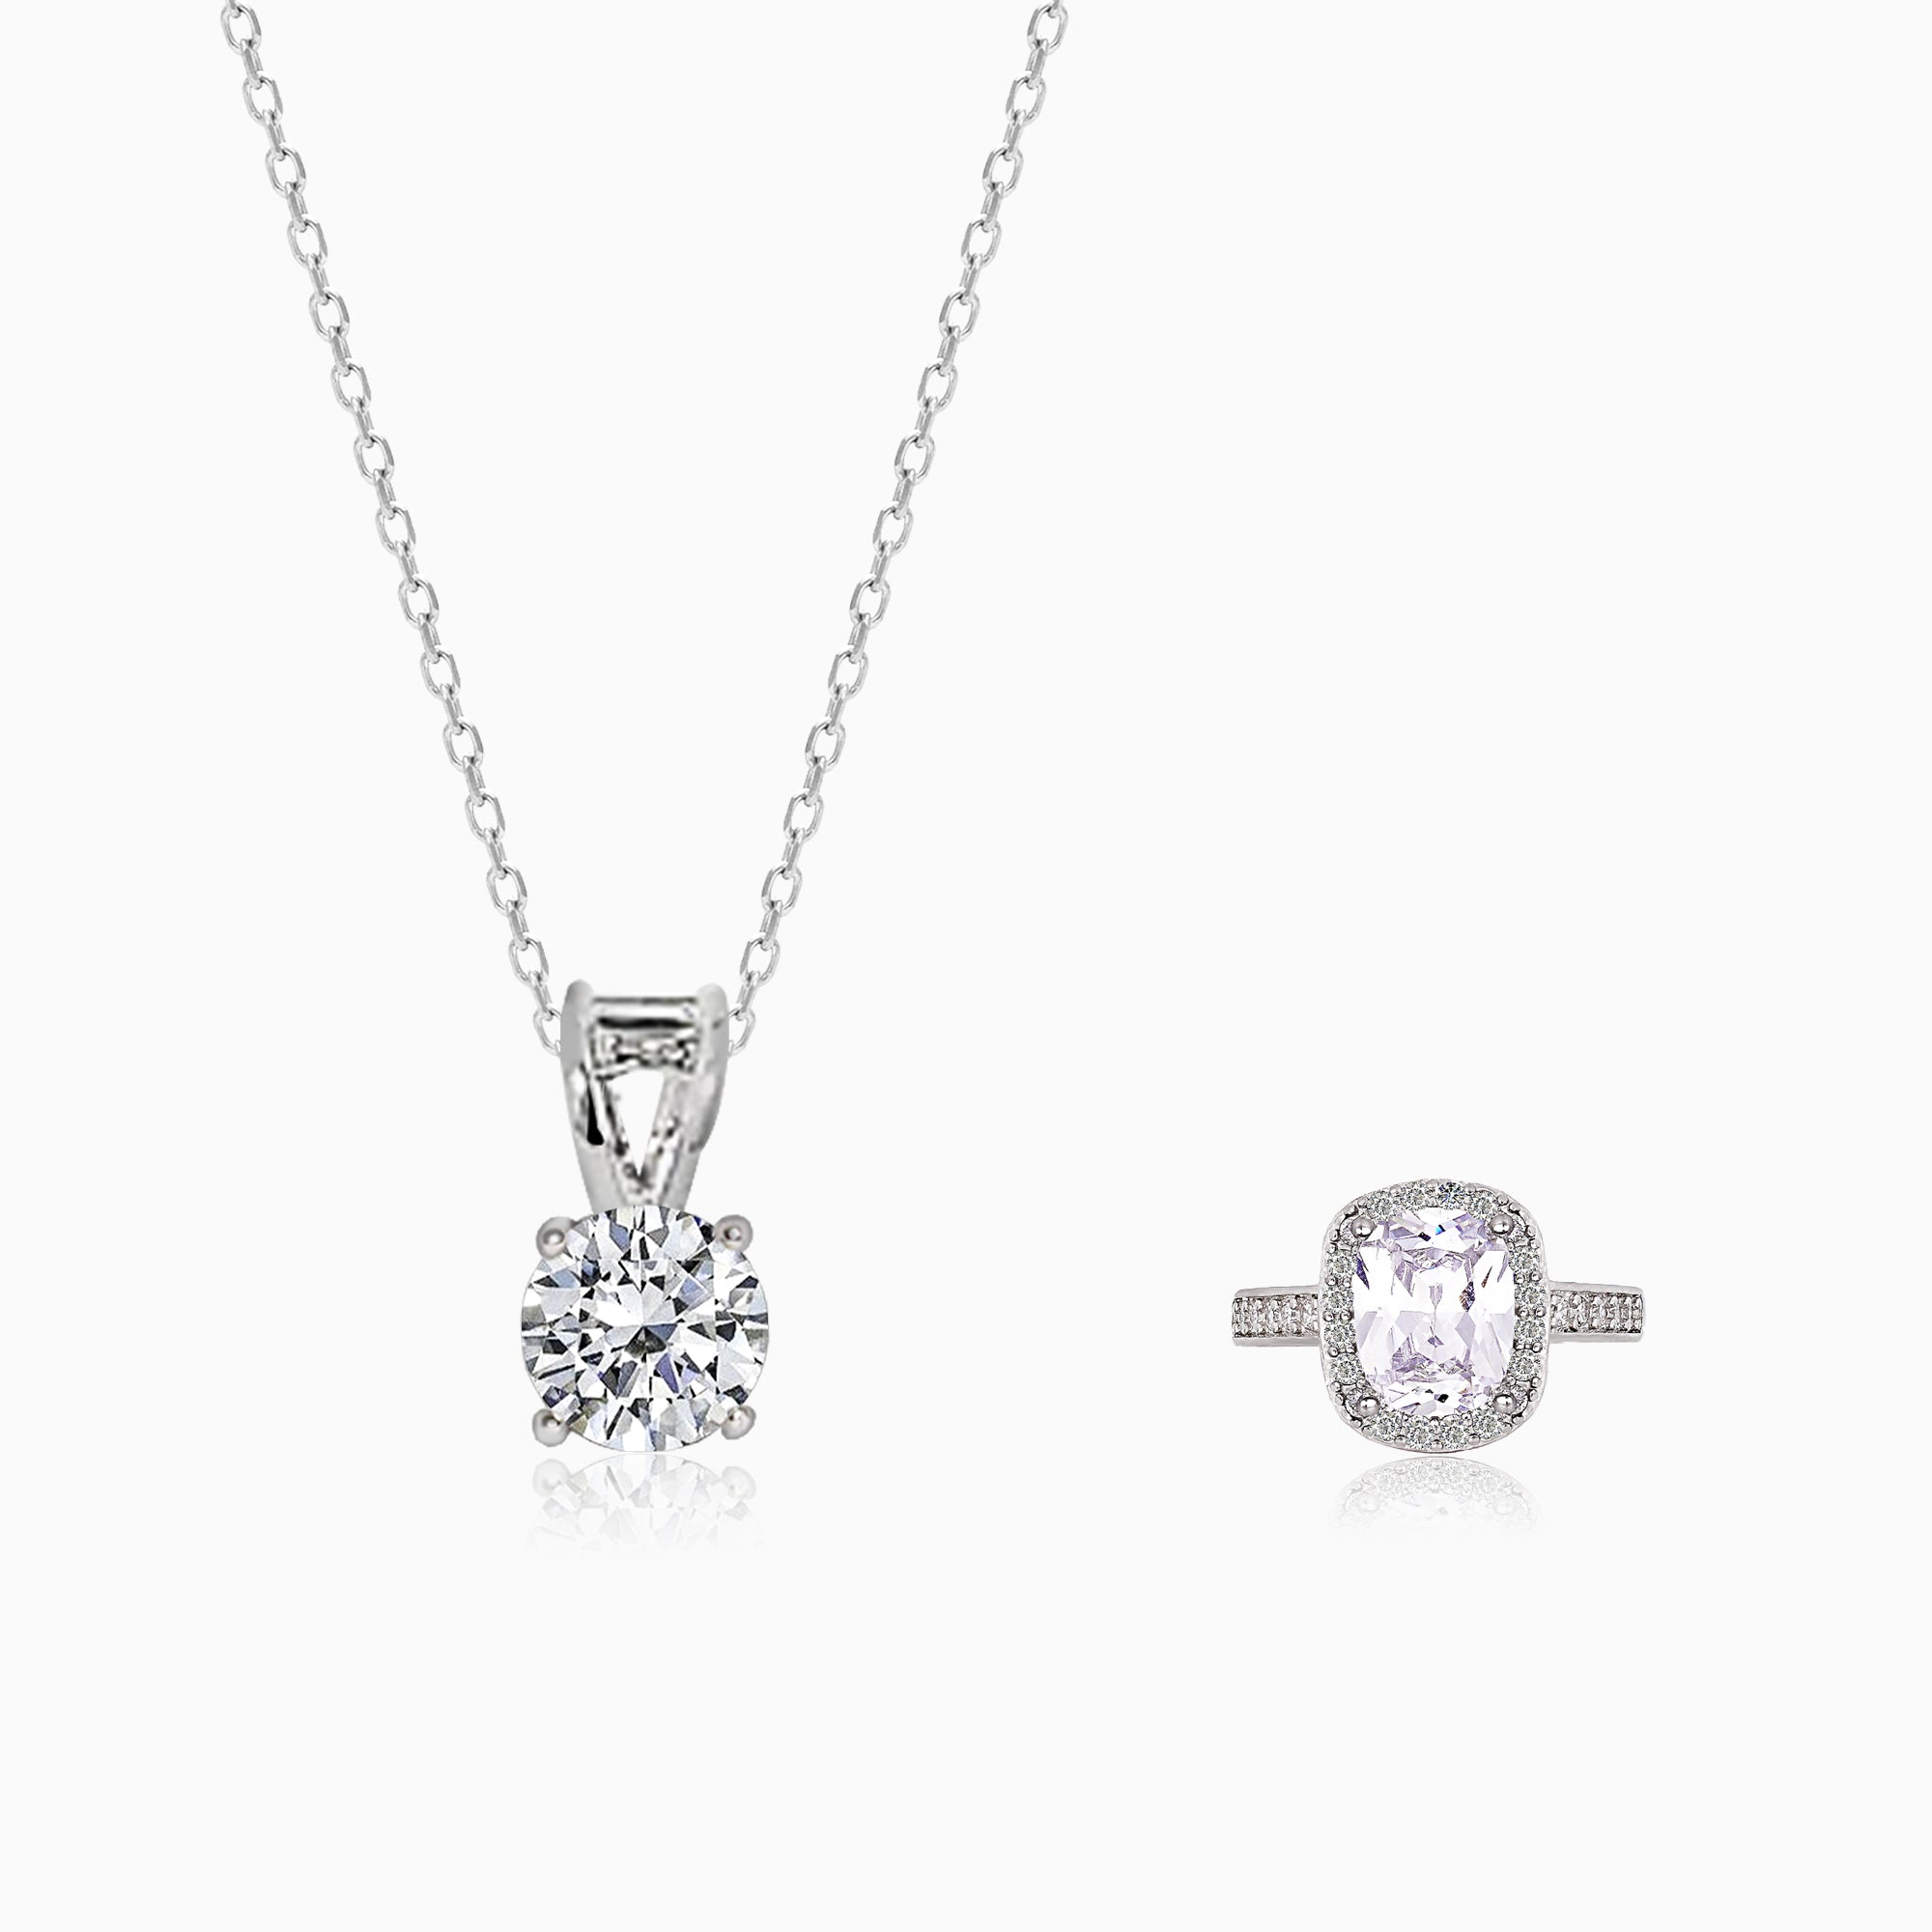 Platinum Plated Sterling Silver Moissanite Halo Stud Earrings (5 MM Round,  1 CT DEW, CERTIFIED) & Matching Halo Pendant (6.5 MM, 1 CT DEW, Certified)  - TL-MO-0008-SIMOWG-SET